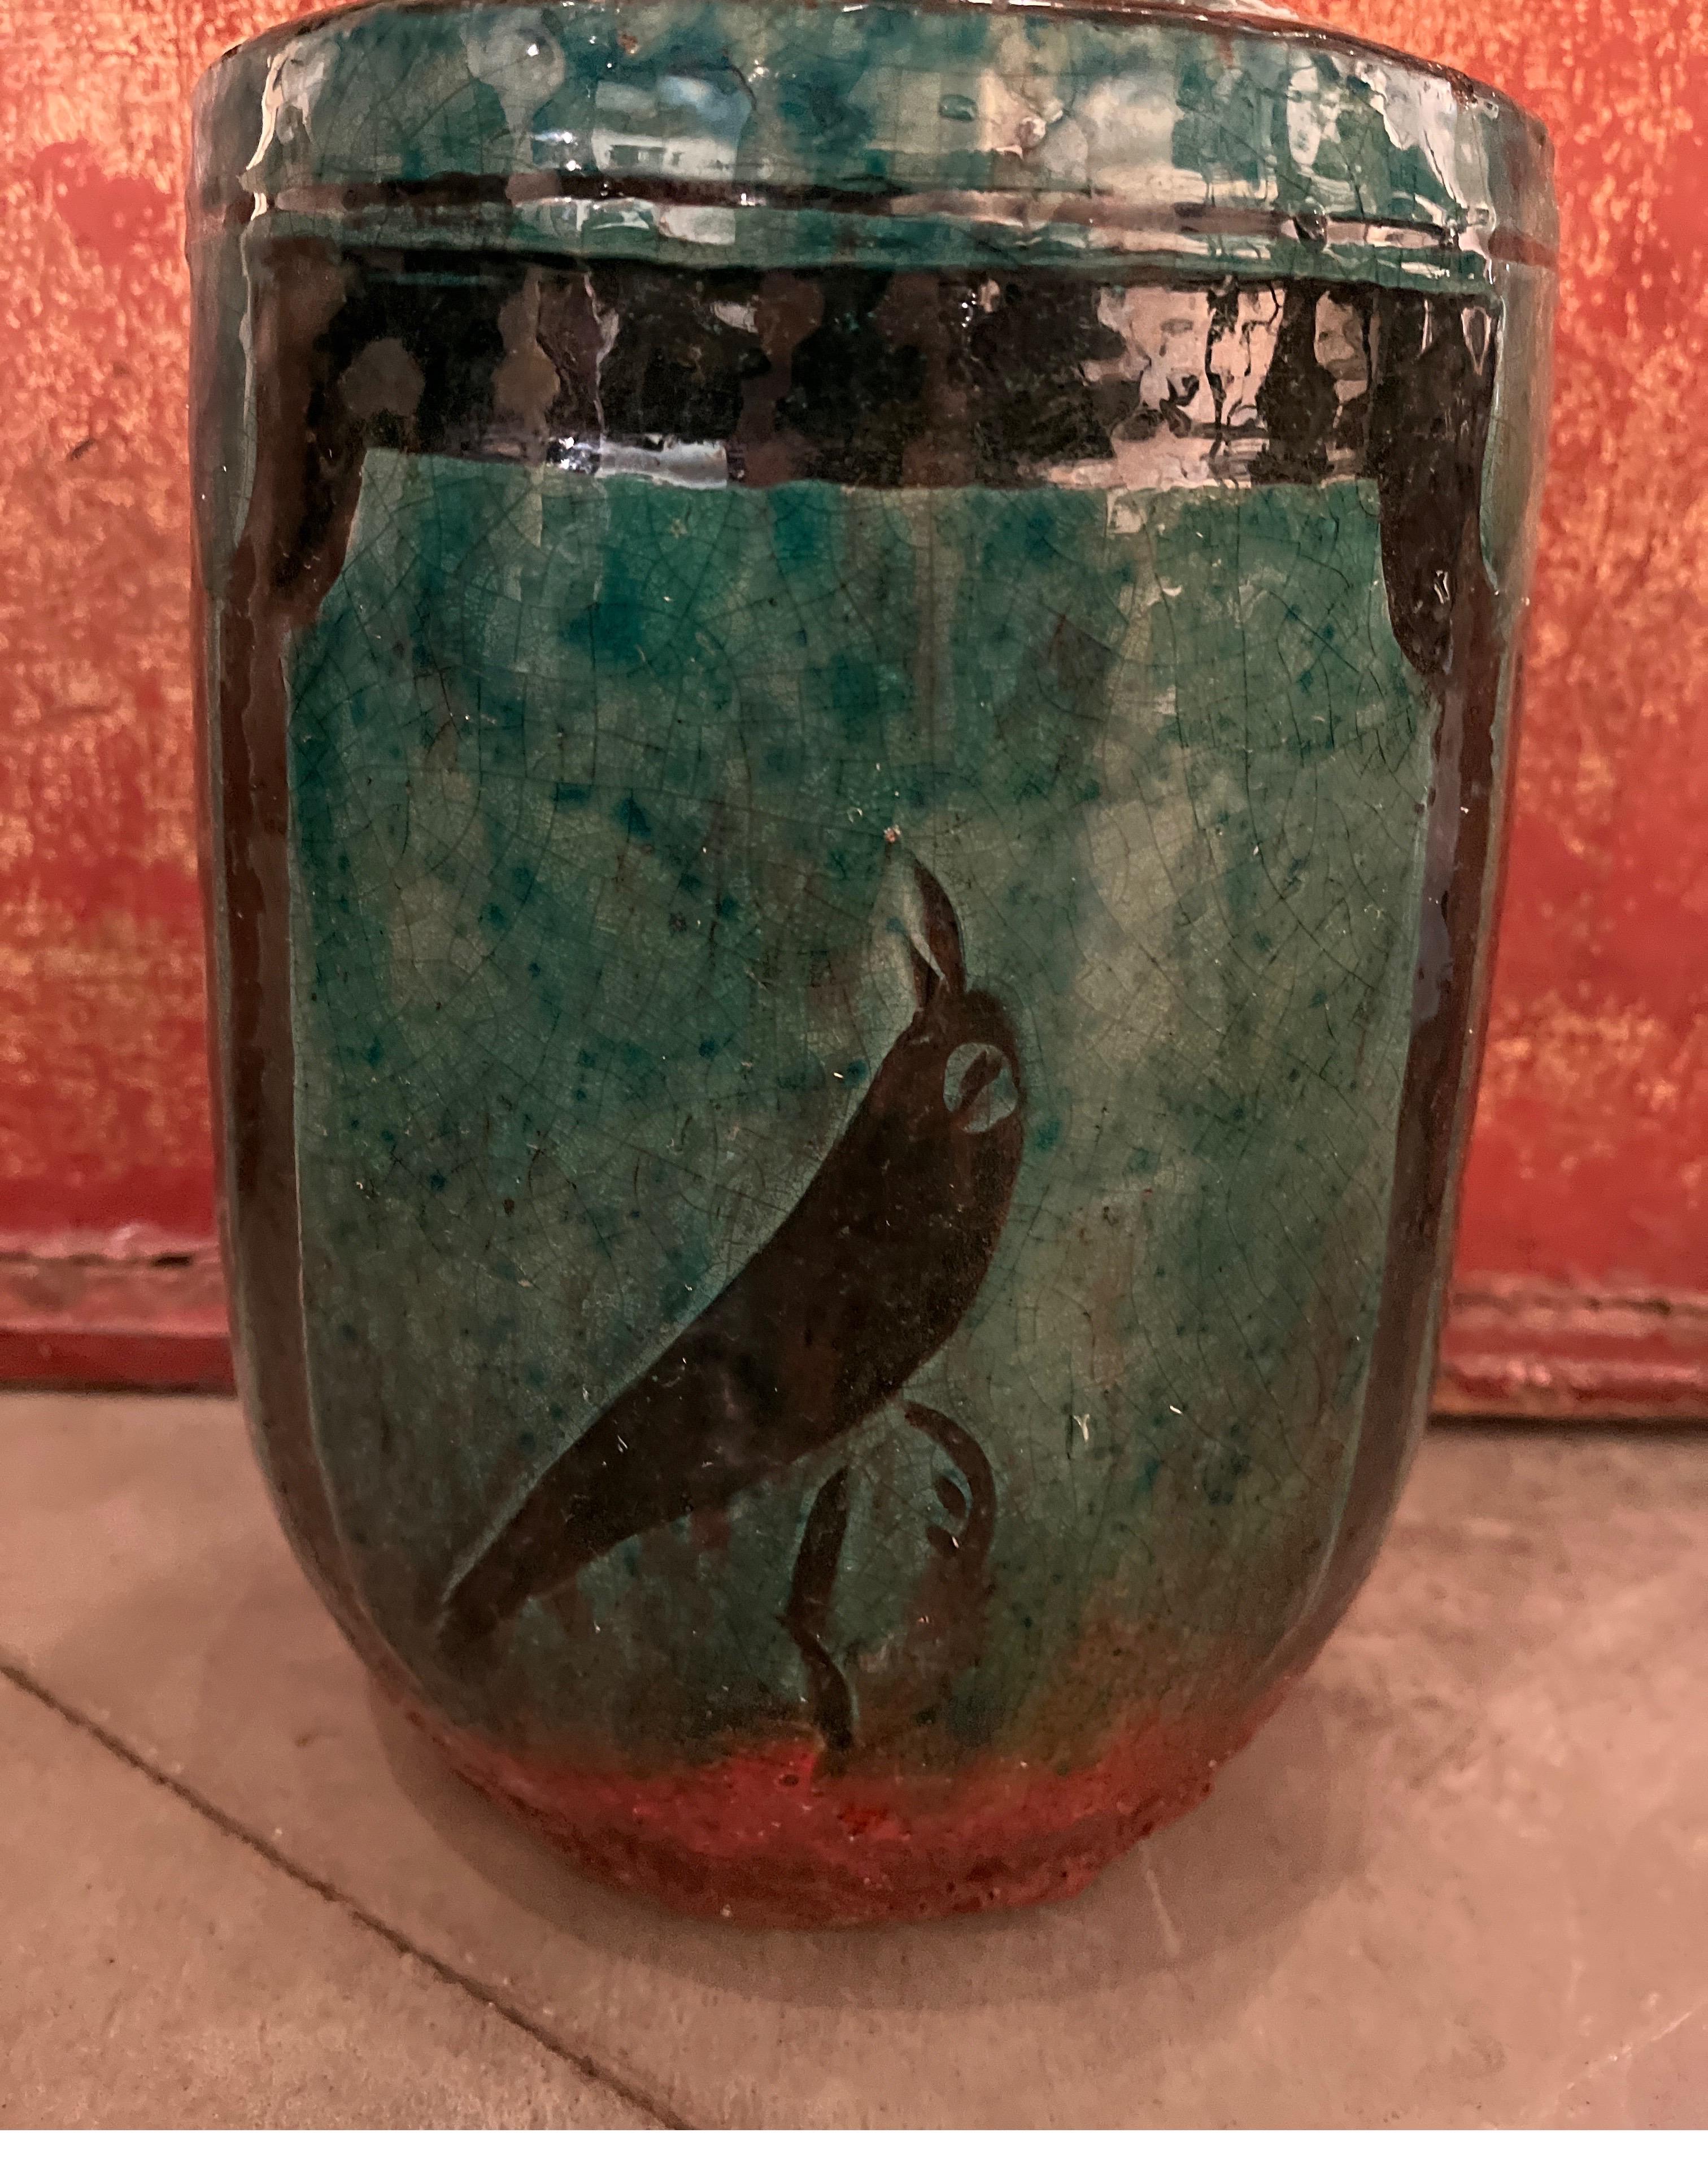 Chinese 19th Century Ceramic Jar/Vase  With Green Glaze And  Hand Painted Bird Image